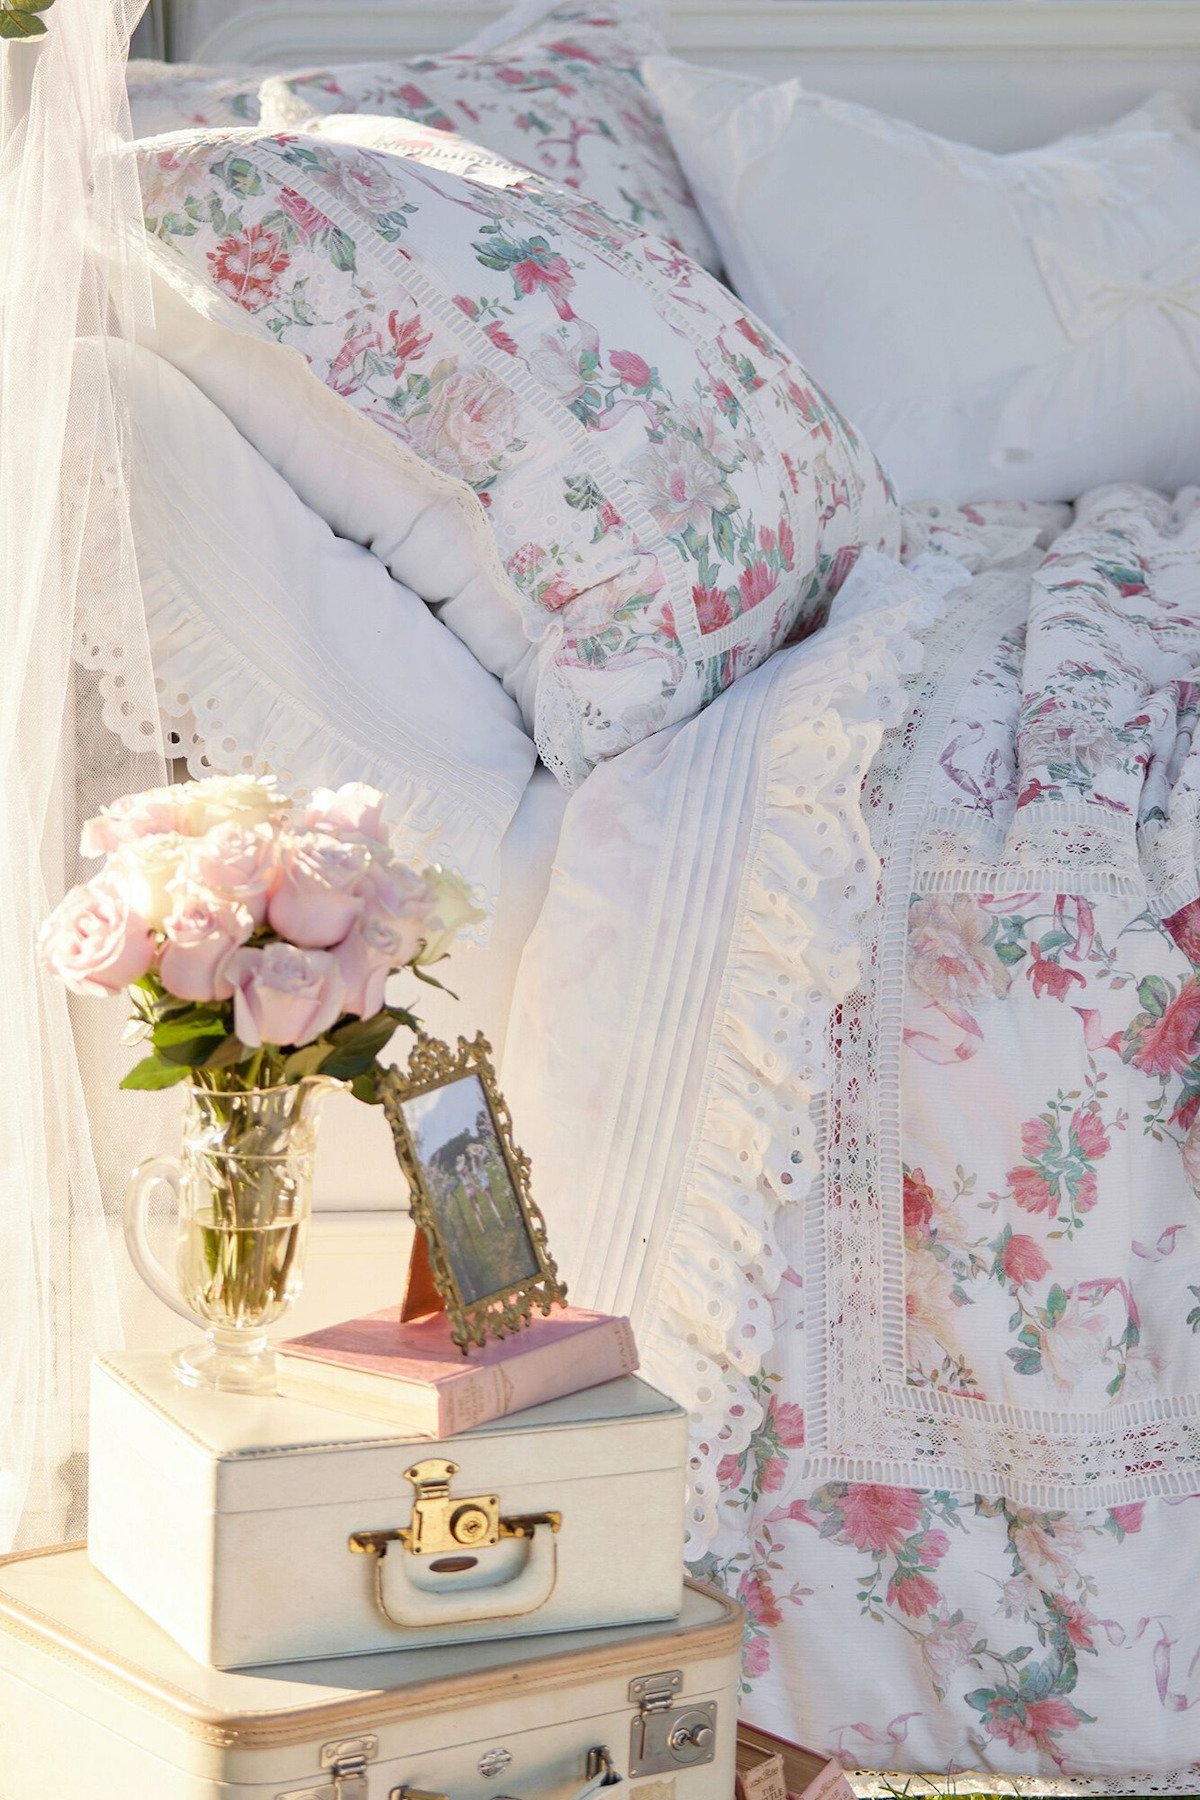 A bed with a floral comforter and a vase of flowers, perfect for a tween bedroom.